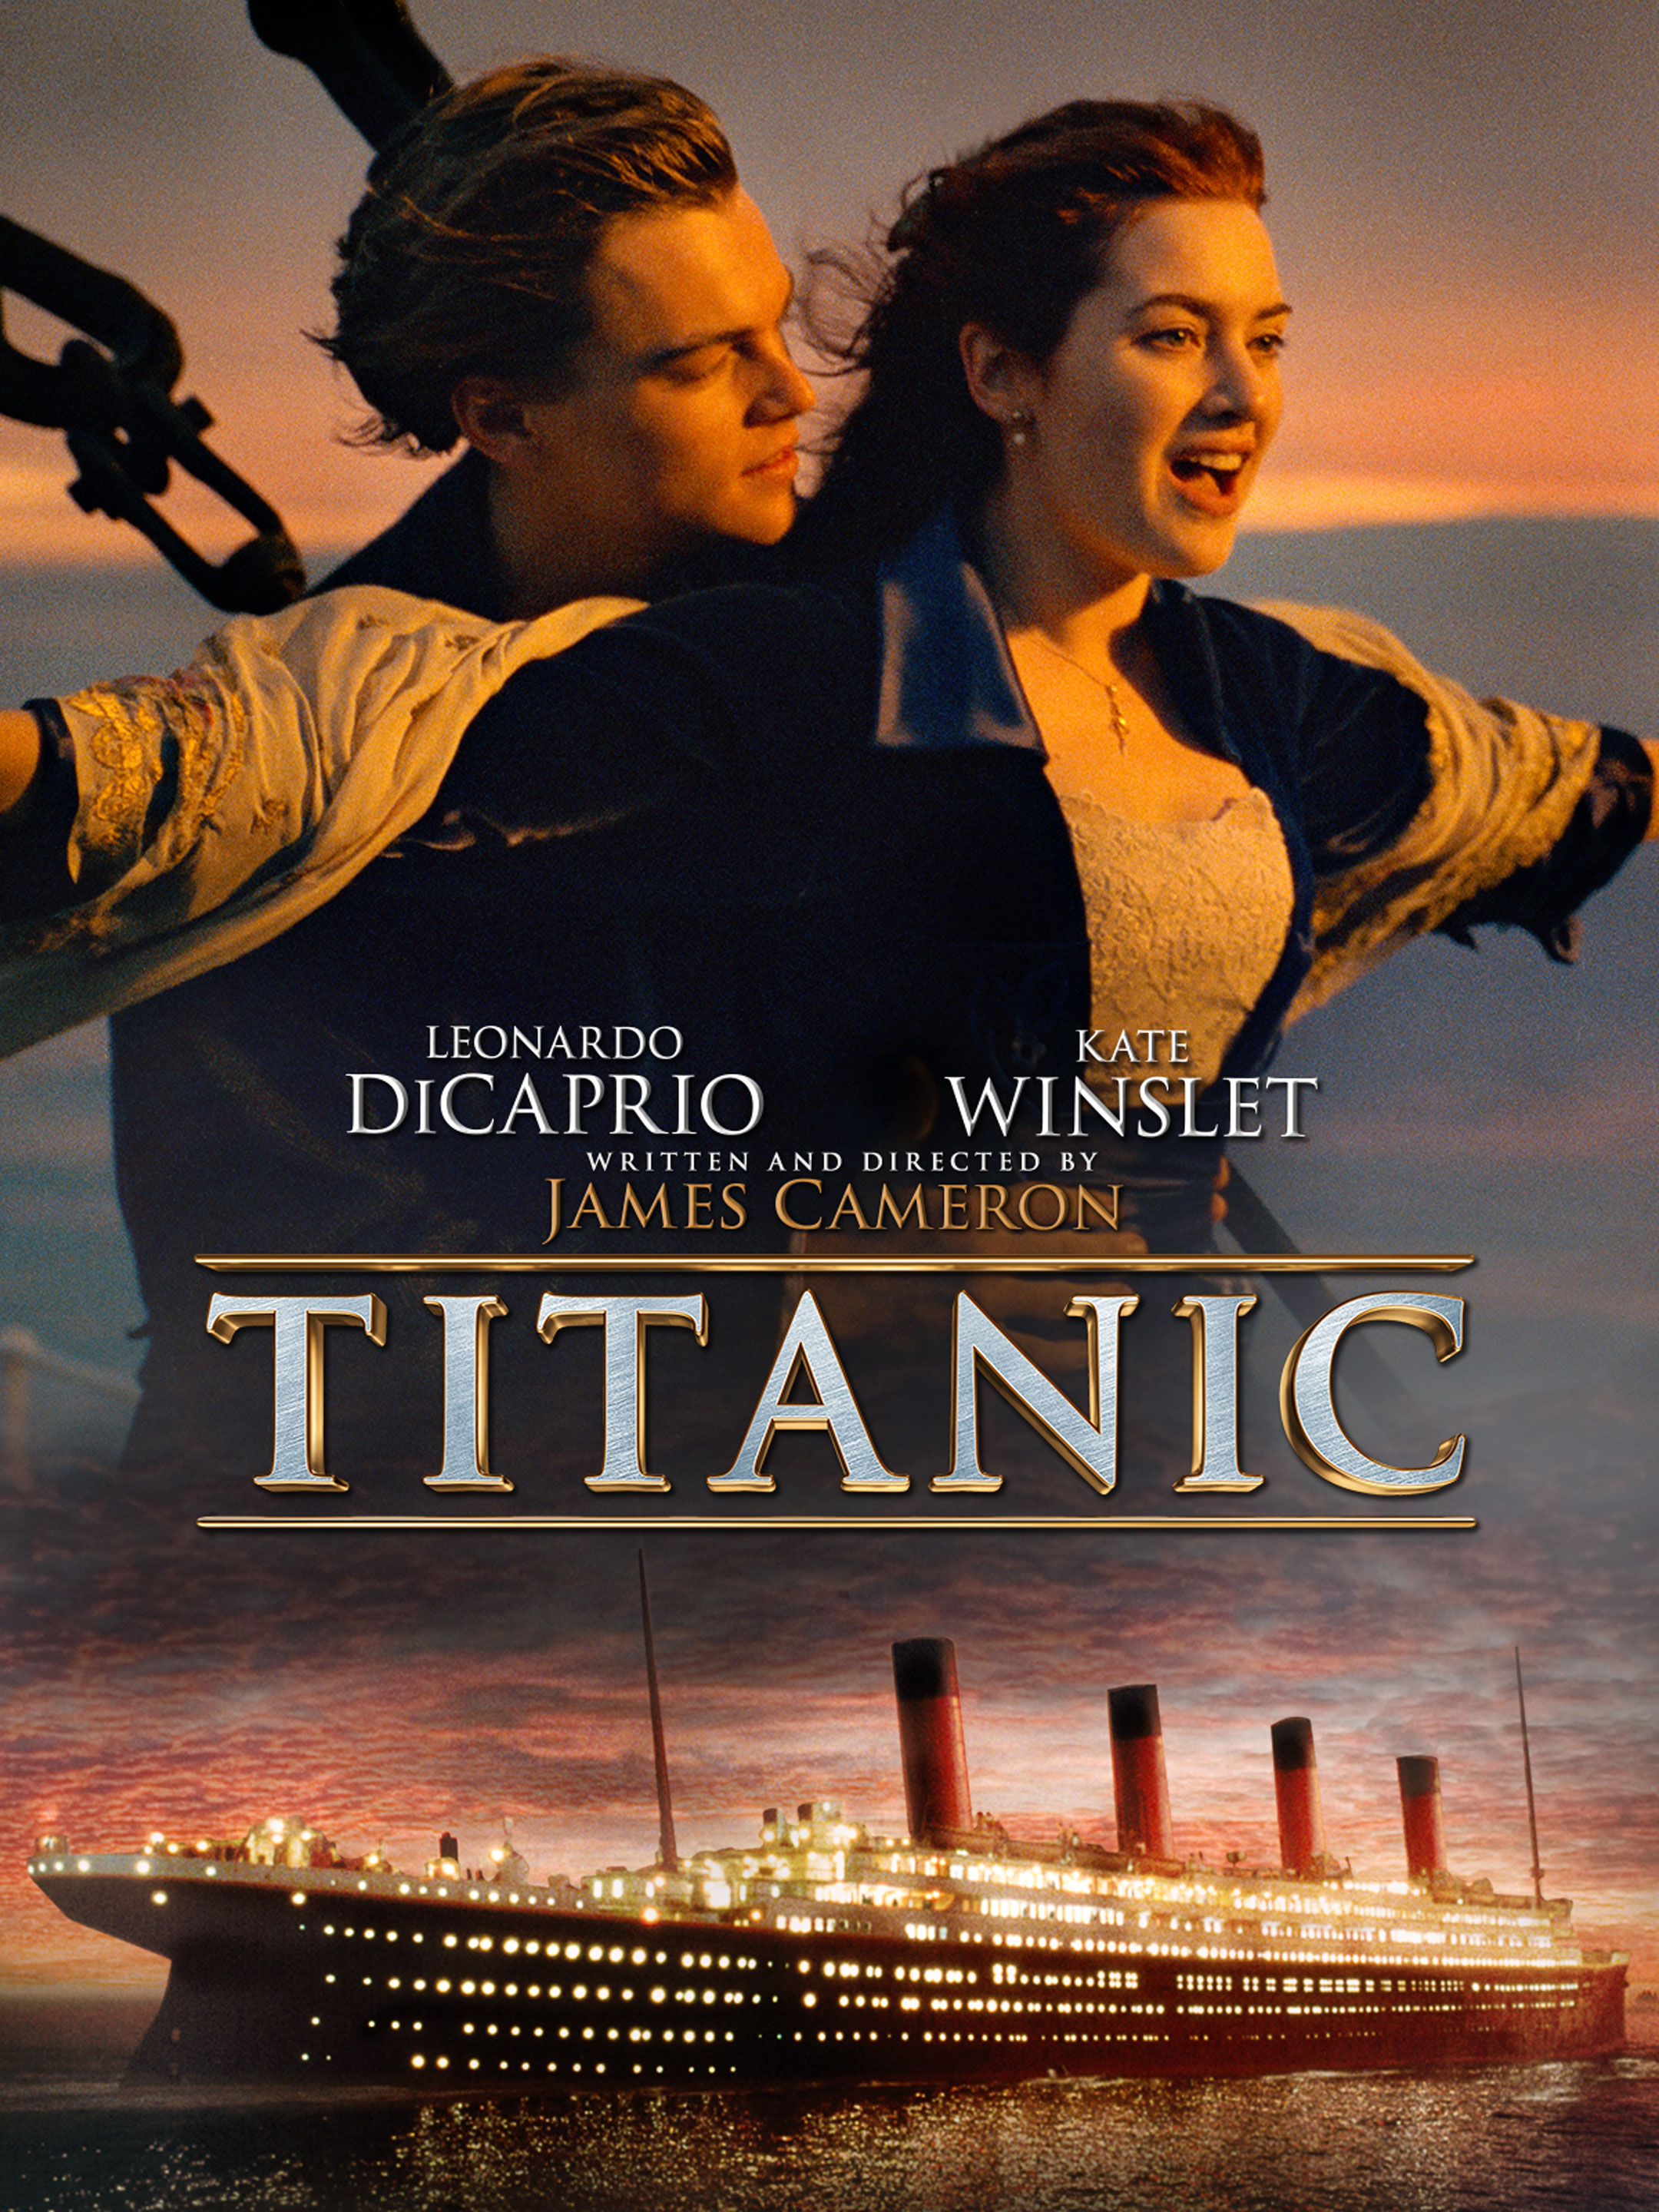 Titanic - Movie Reviews and Movie Ratings - TV Guide best hollywood movies